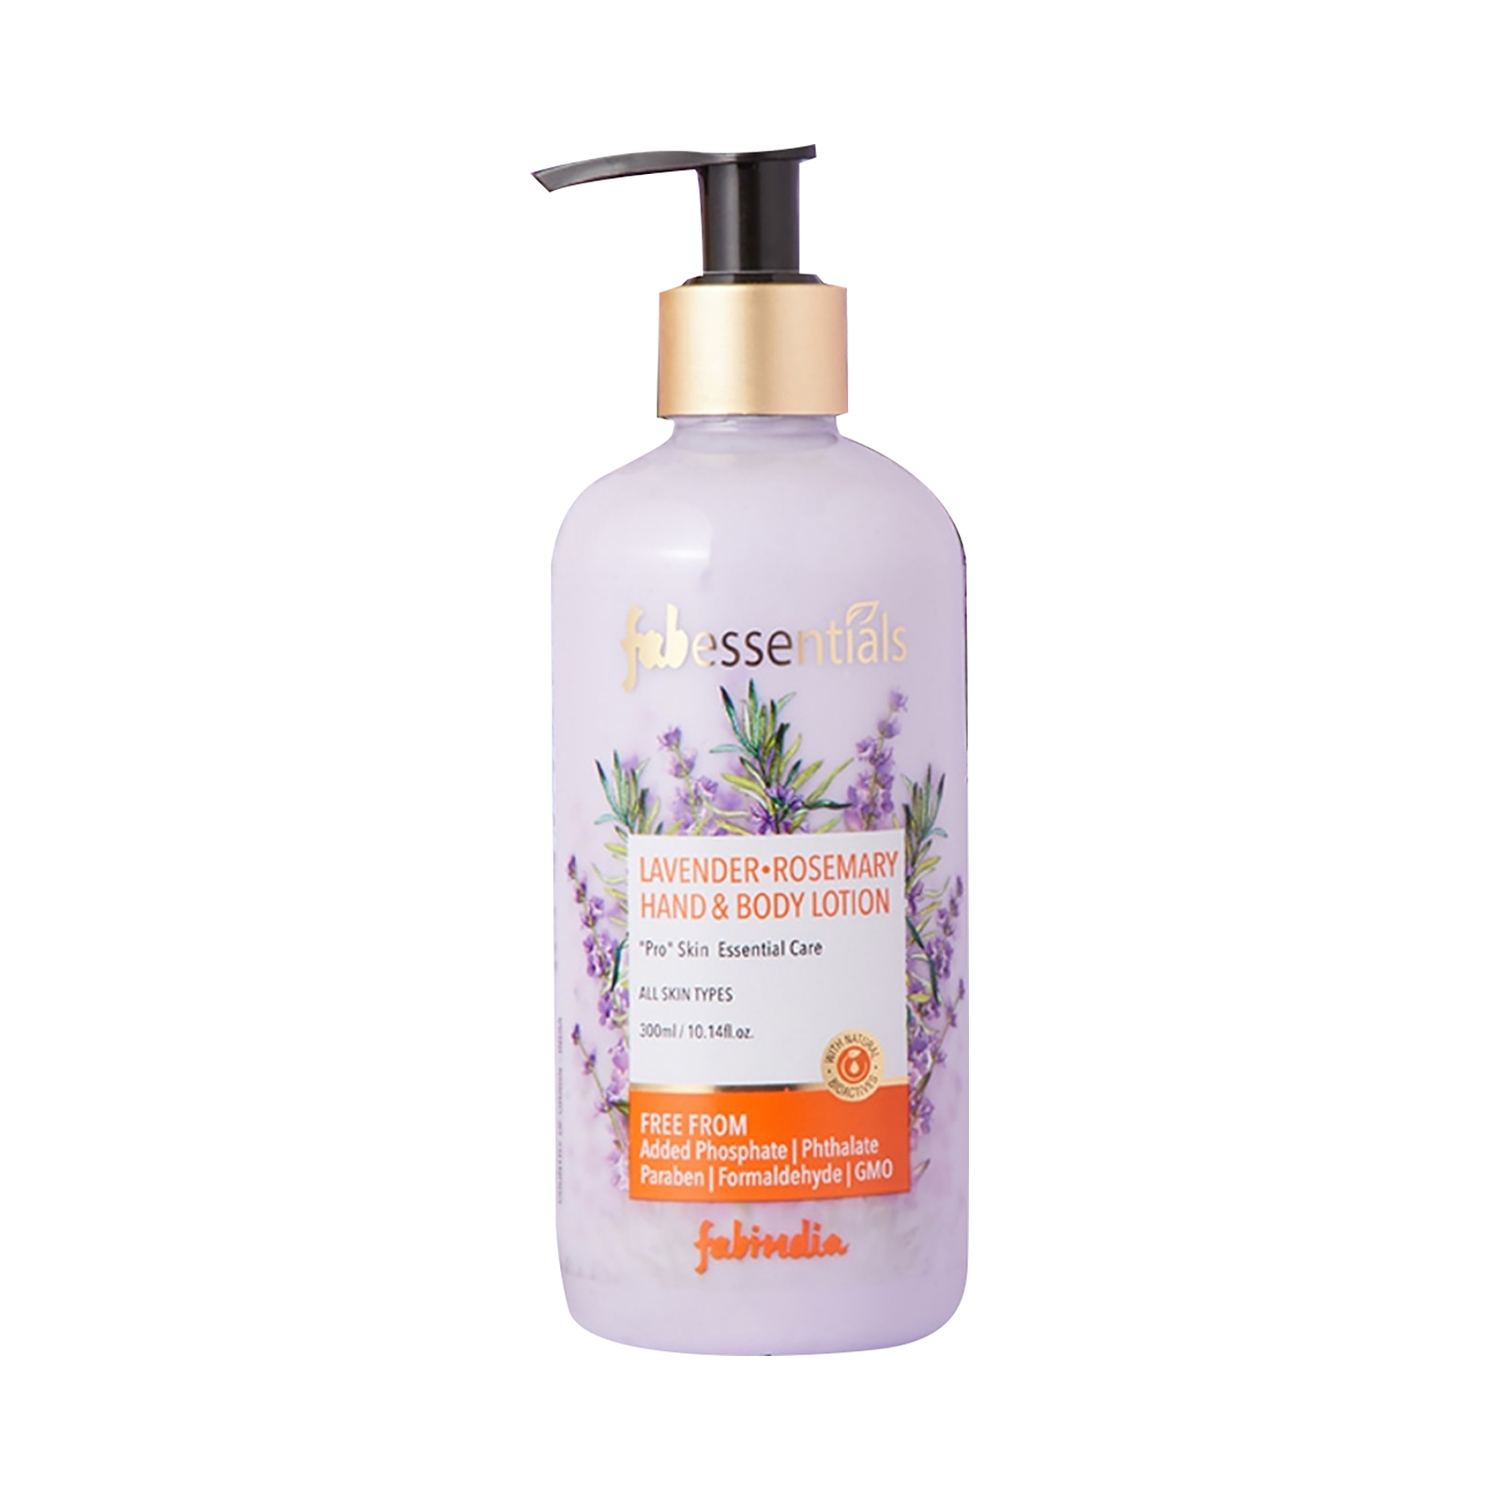 Fabessentials by Fabindia | Fabessentials by Fabindia Lavender Rosemary Hand & Body Lotion (300ml)